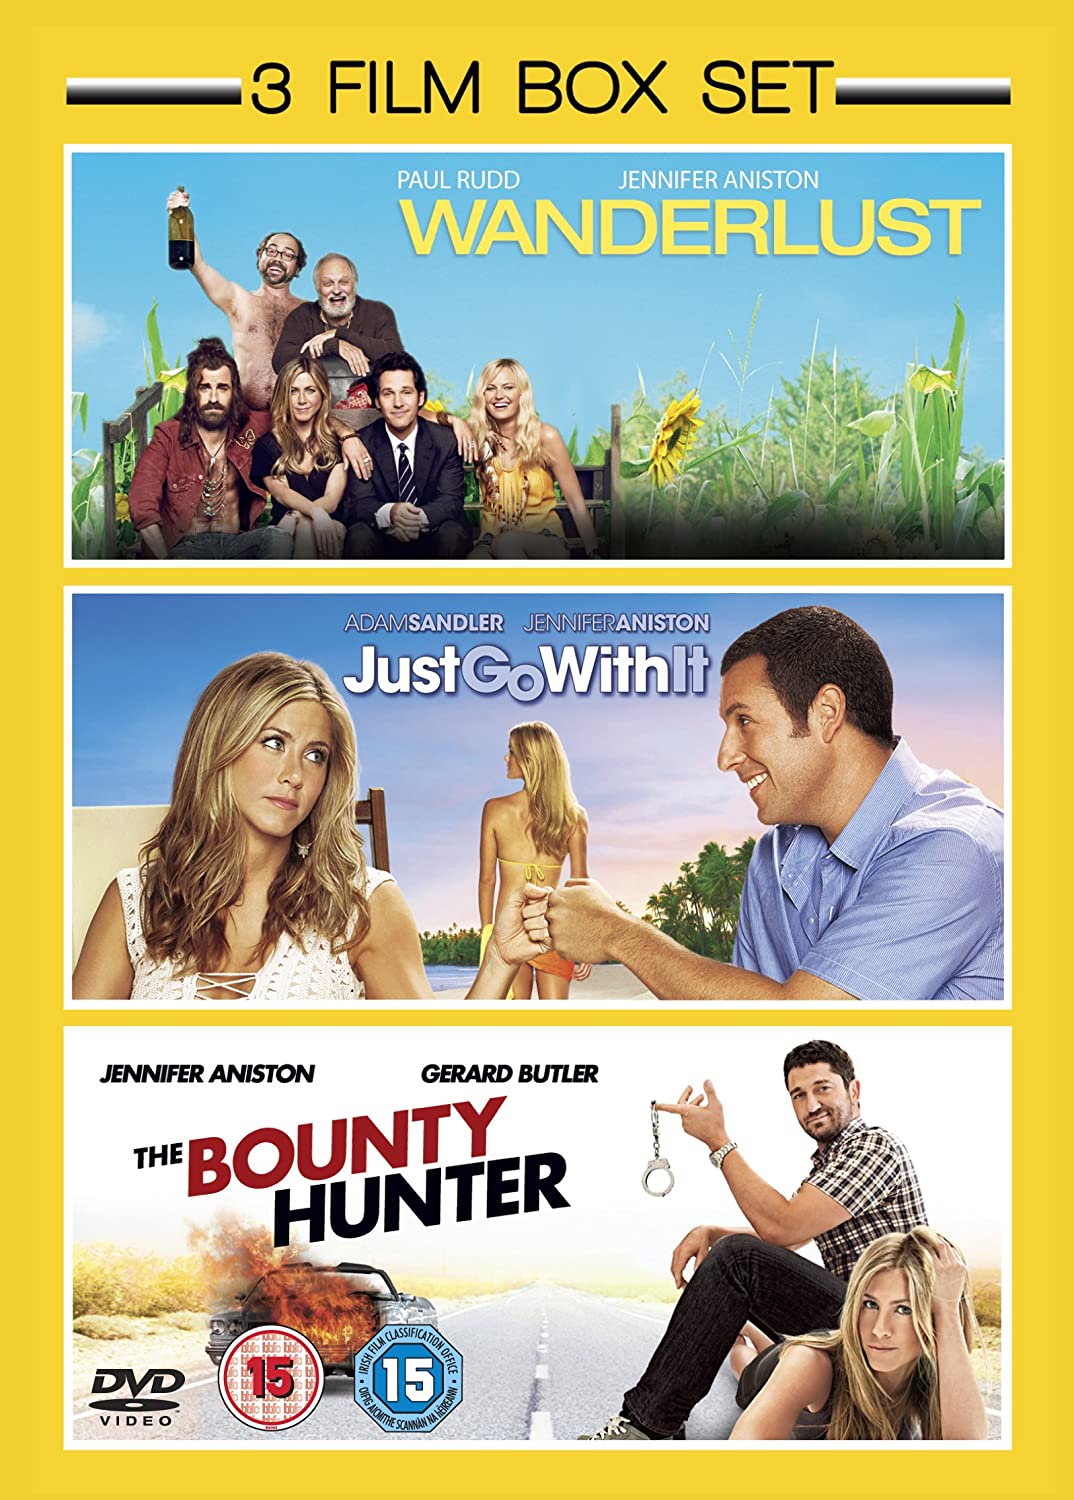 Just Go with It (2011) / Wanderlust (2012) / The Bounty Hunter (2010) - Triple P - Rom-com [DVD]